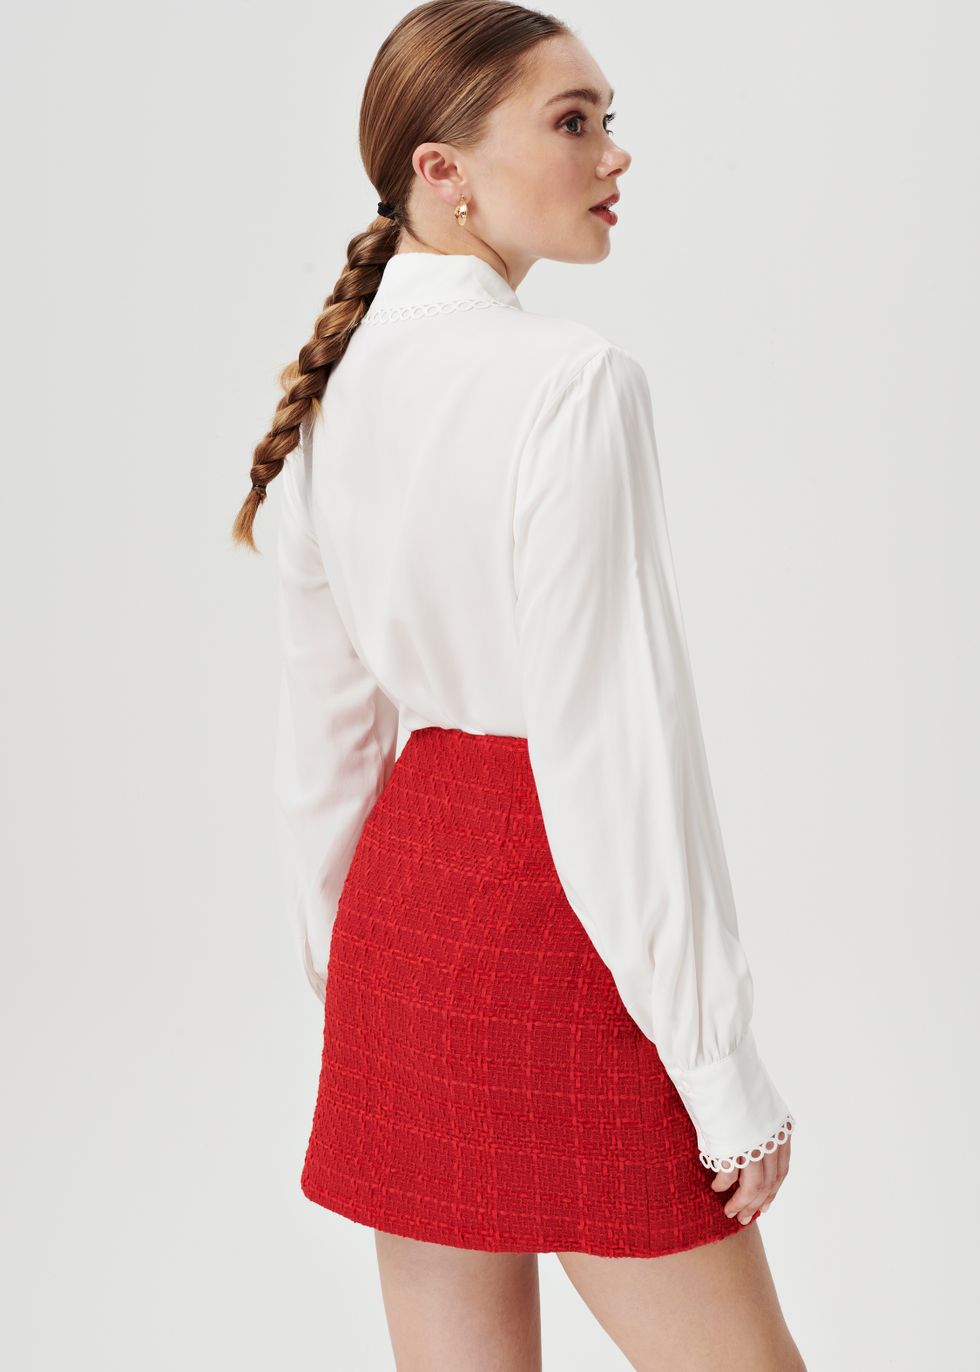 Stoutmoedig Buurt iets Costes Fashion | Official Webshop - Boucle Button Skirt